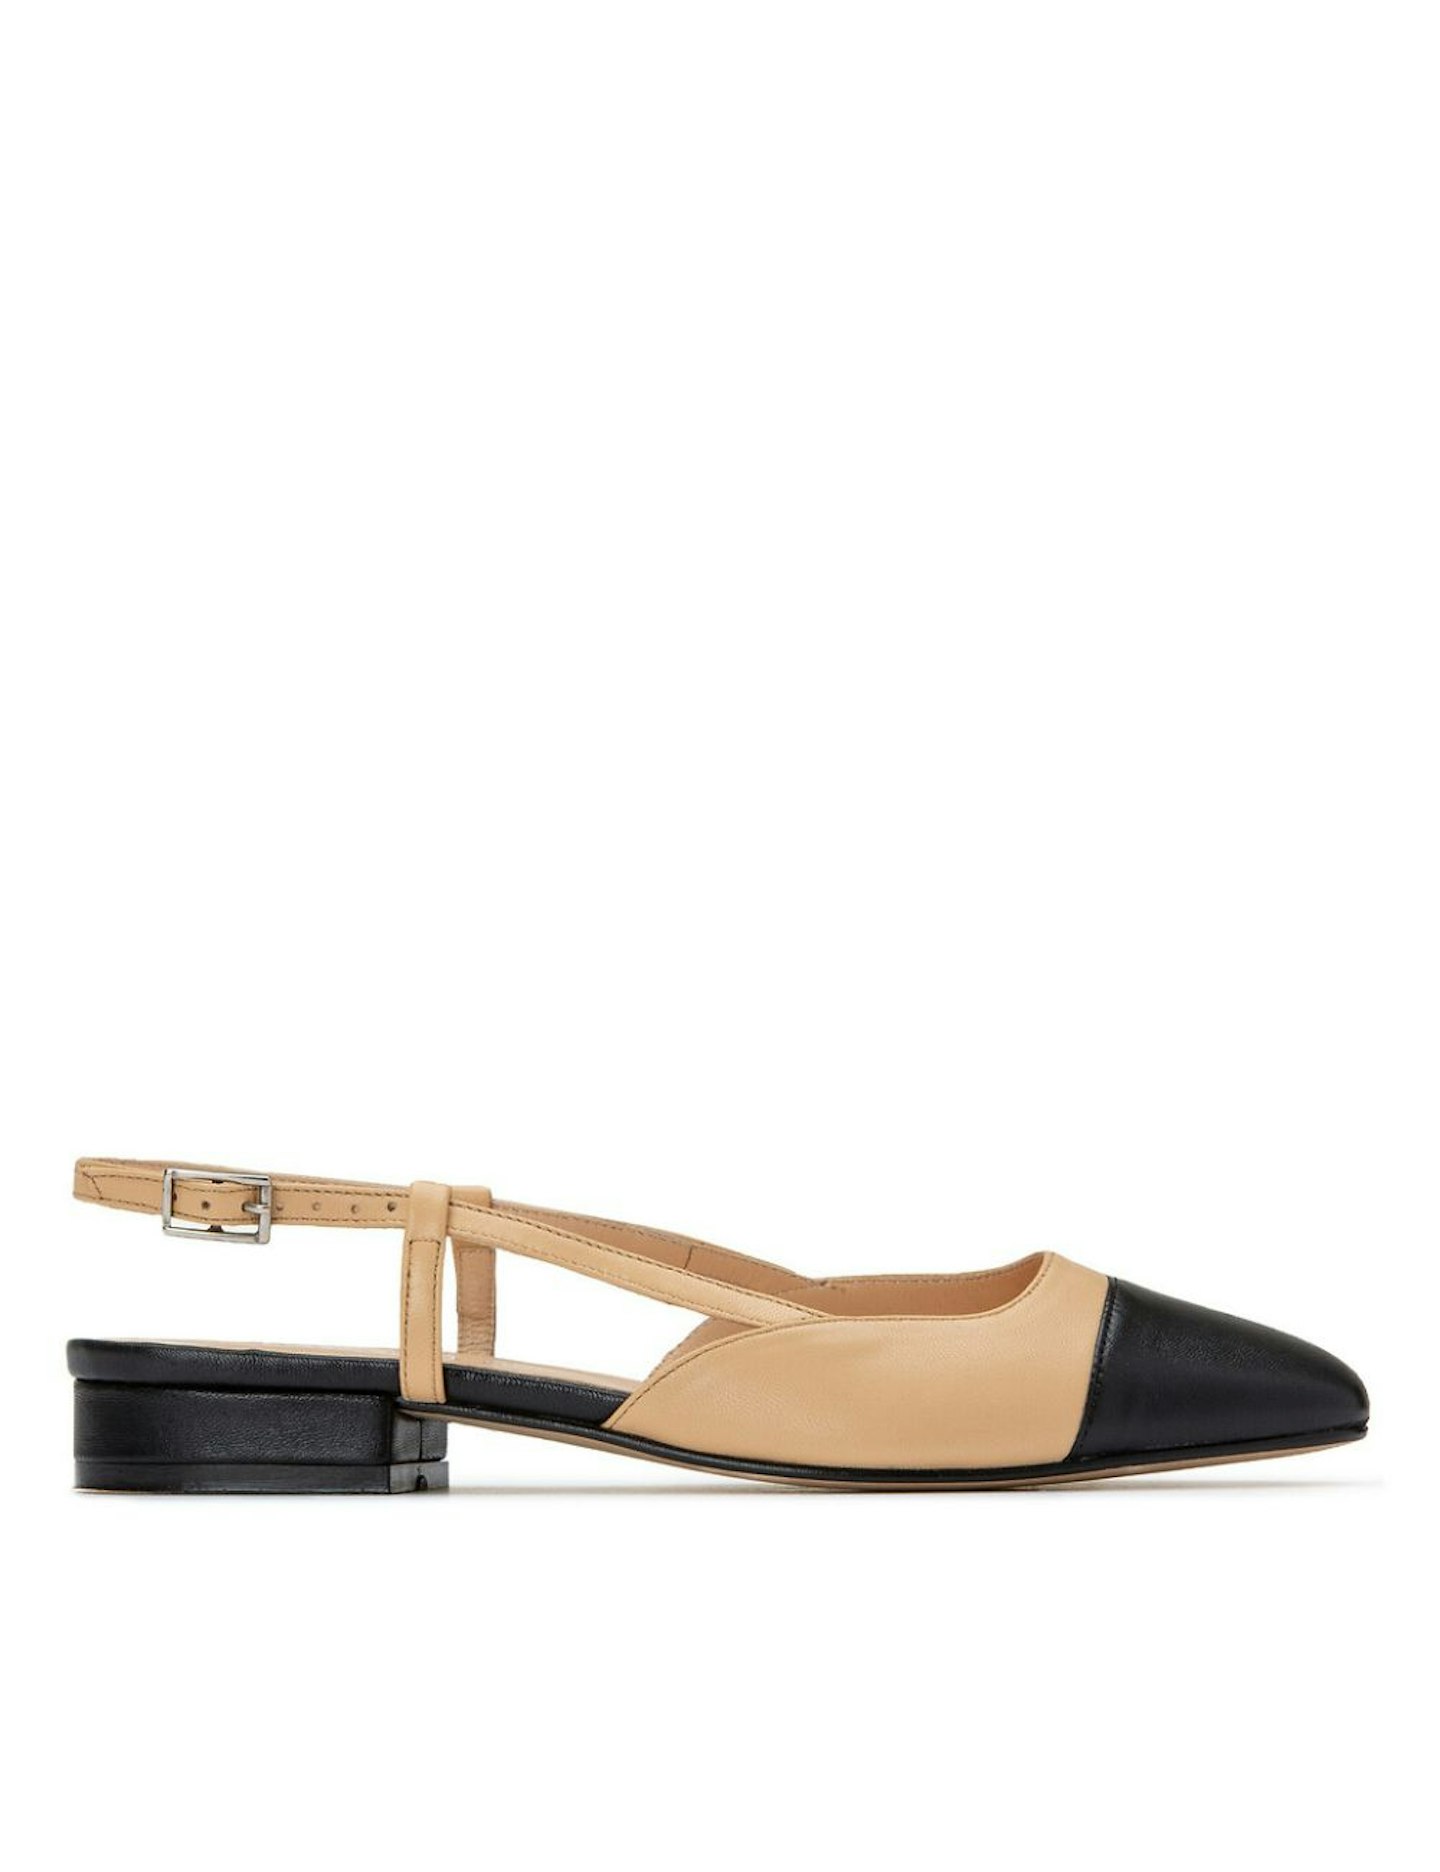 La Redoute Two-Tone Ballet Flats in Quilted Leather